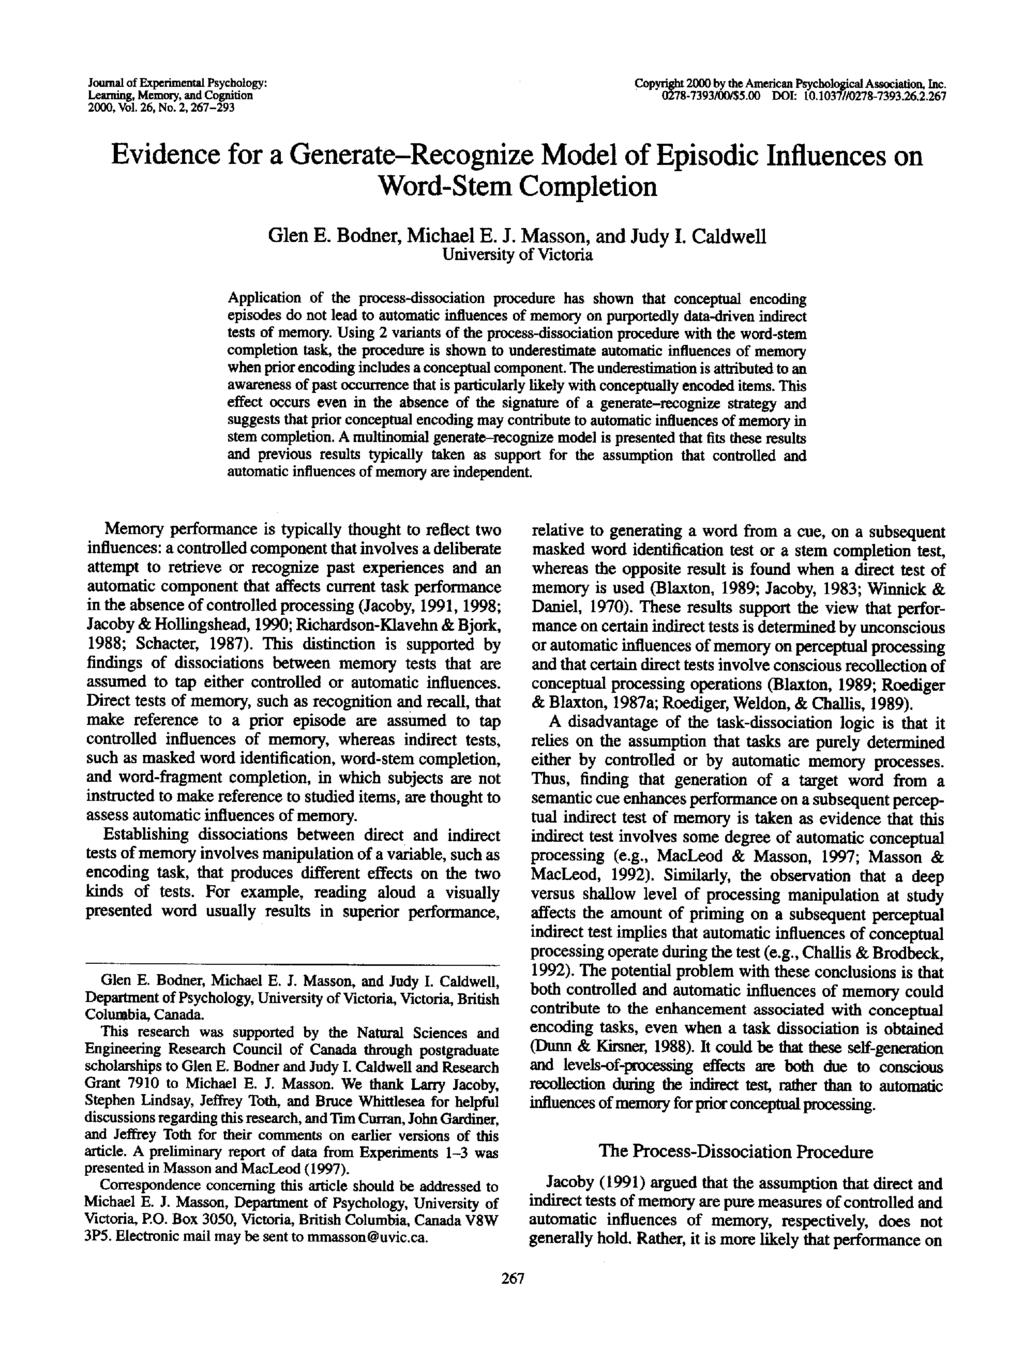 Journal of Experimental Psychology: Learning, Memory, and Cognition 2000, Vol. 26, No. 2, 267-293 Copyright 2000 by the American Psychological Association, Inc. 0278-7393/00/$5.00 DOI: 10.